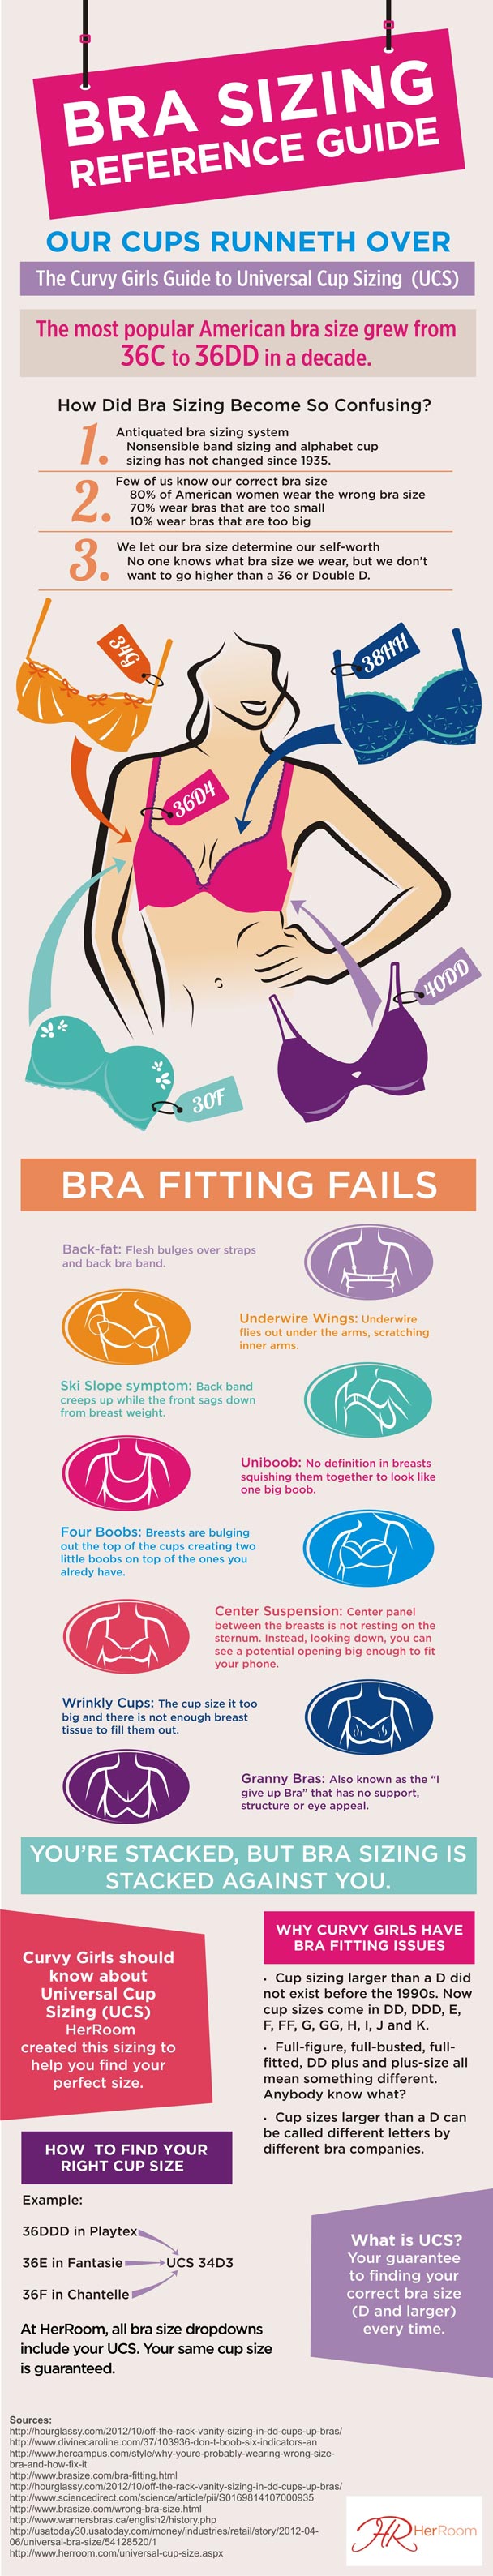 Bra Fitting & Bra Sizing Guide - The Fitting Room